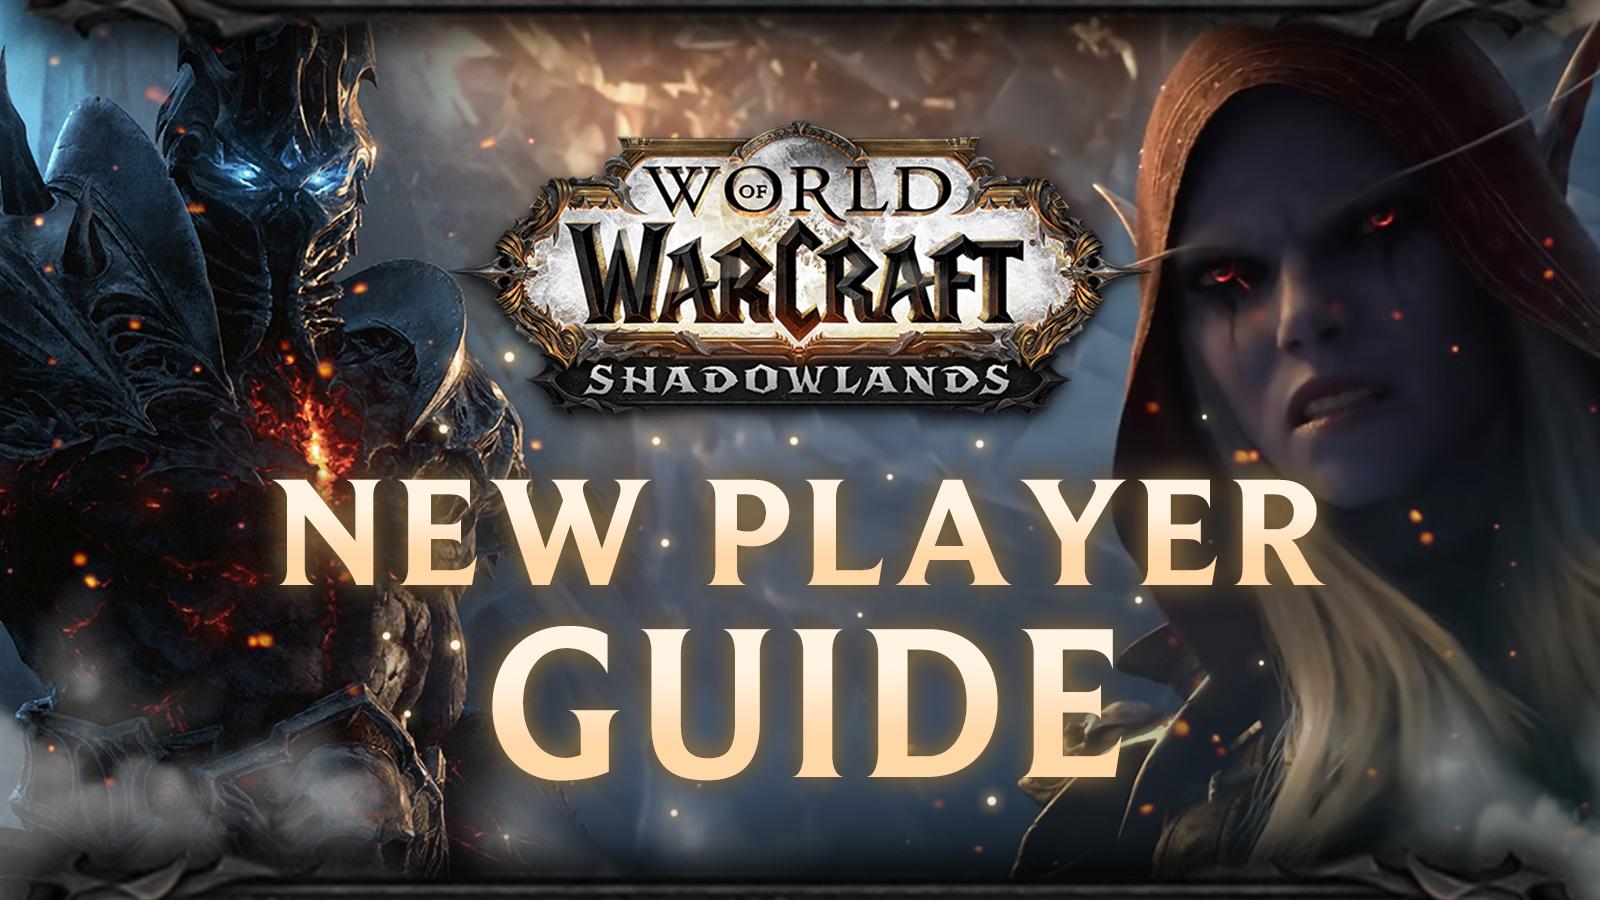 New player guide for WoW, with Sylvanas and Lich King